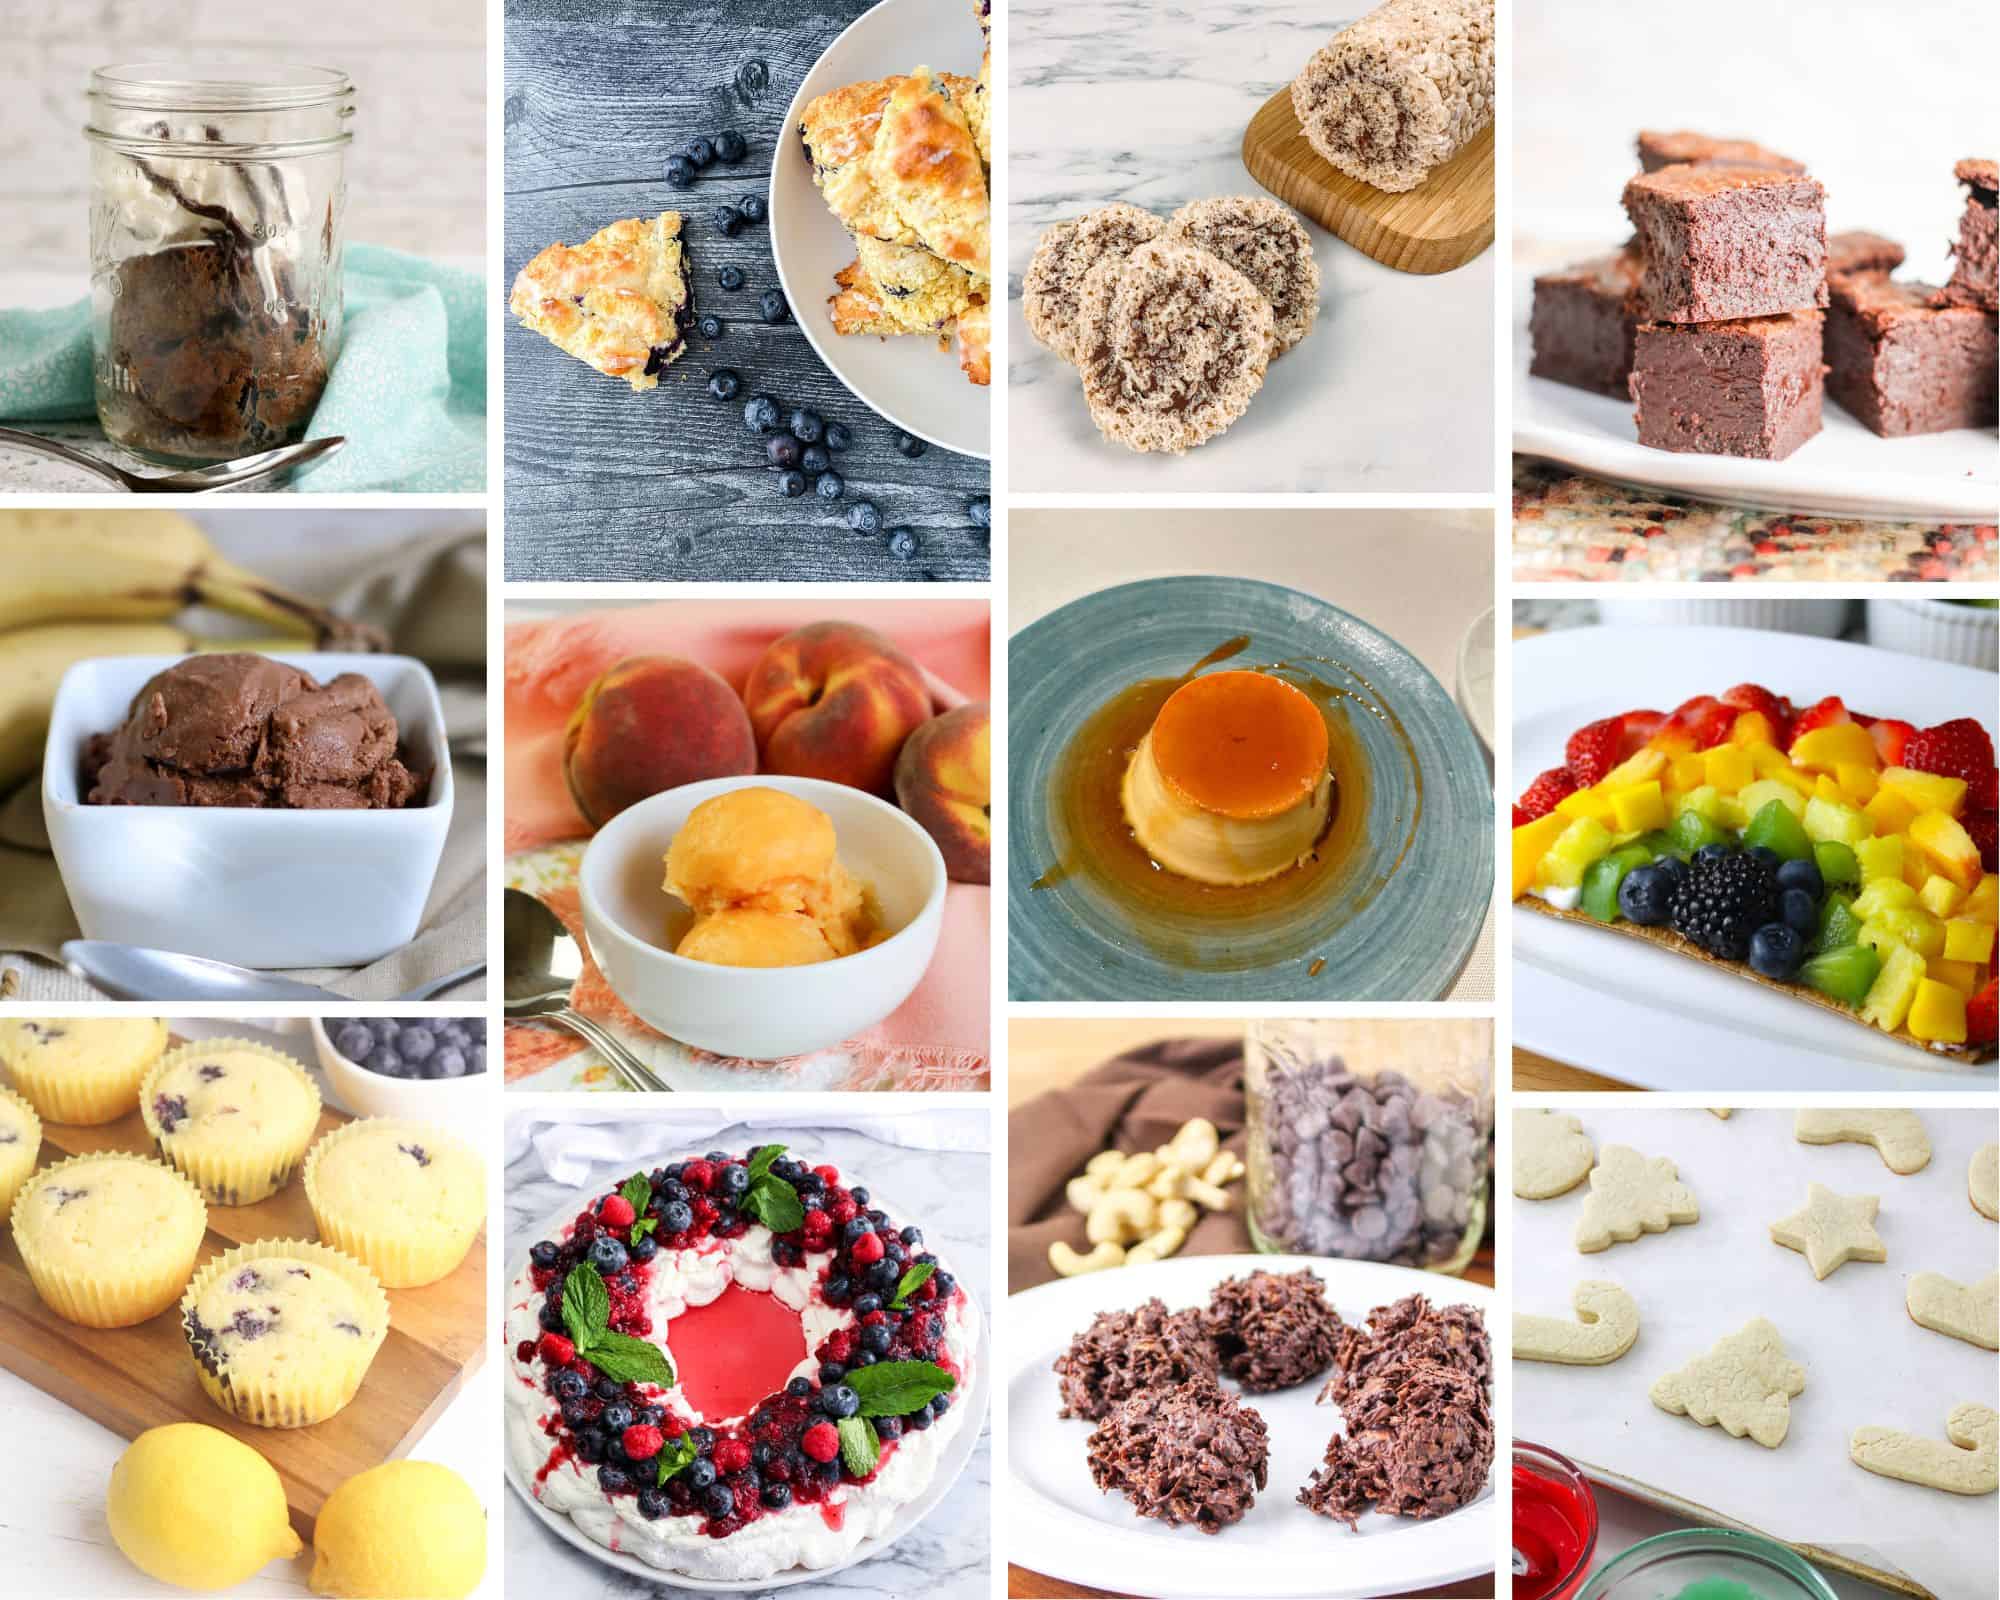 16 Easy and Delicious Gluten-Free Desserts